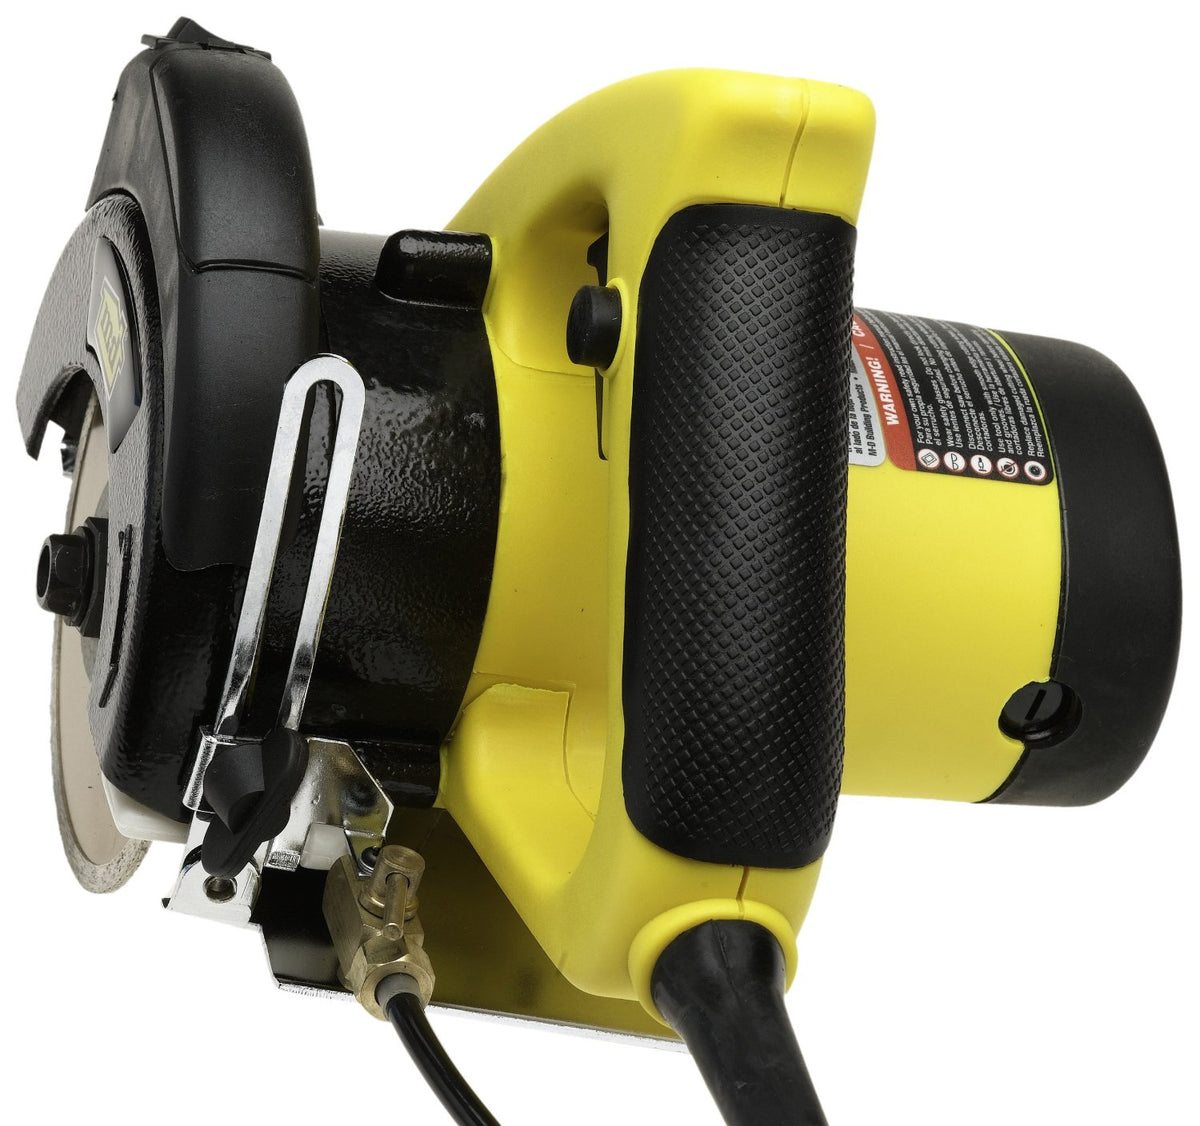 buy electric power saws & tile at cheap rate in bulk. wholesale & retail hand tool supplies store. home décor ideas, maintenance, repair replacement parts